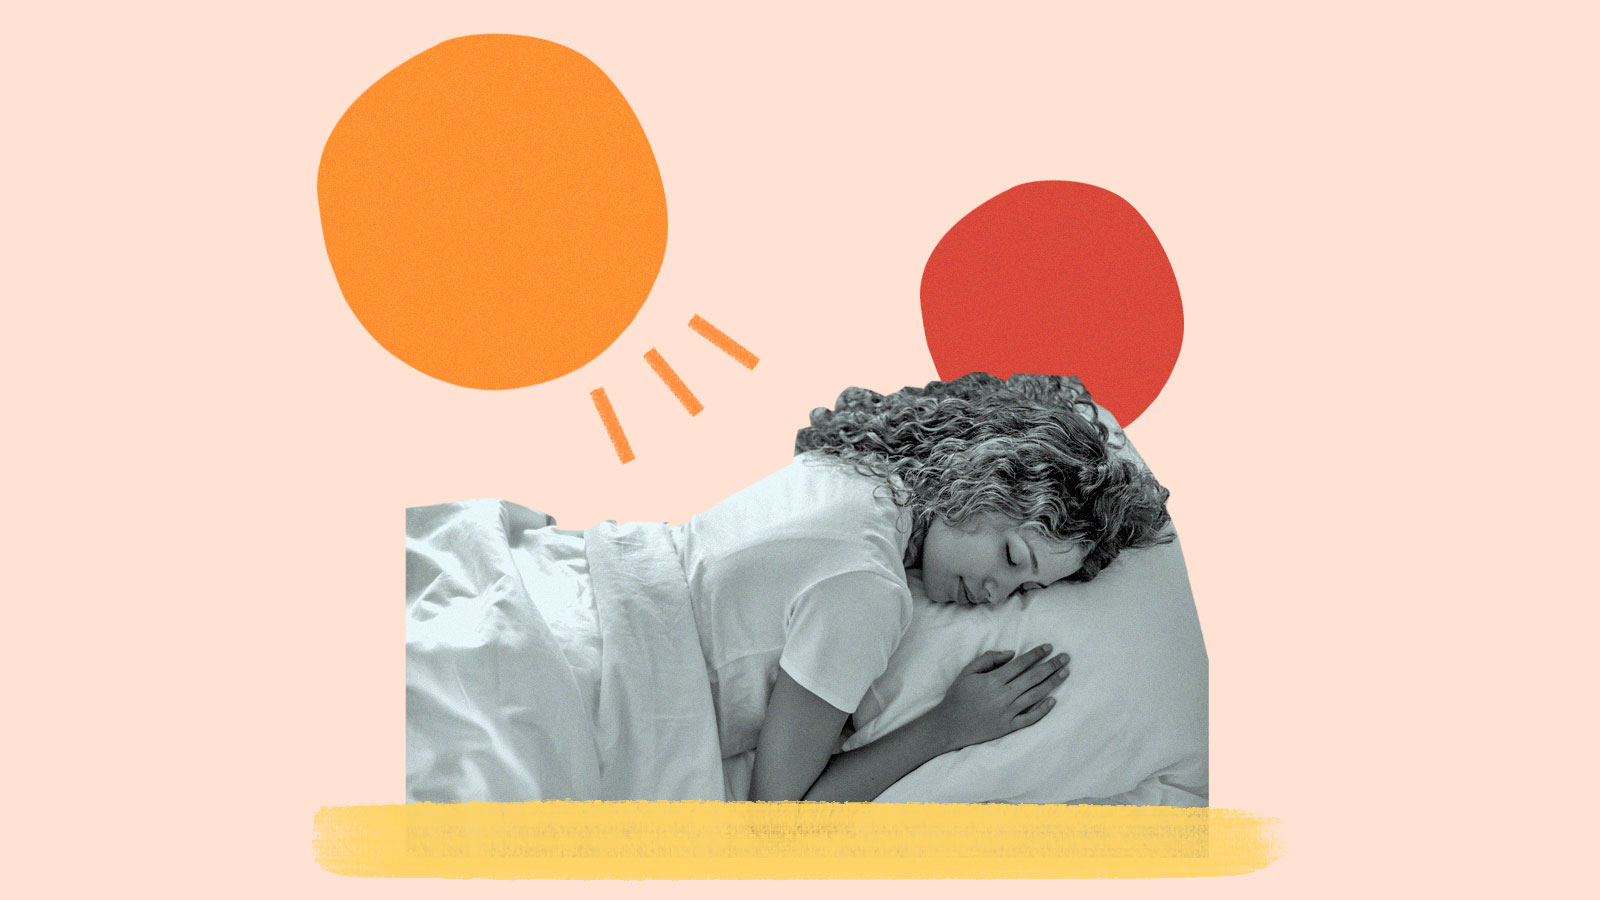 Digital collage of woman sleeping with an orange circle and red circle above her